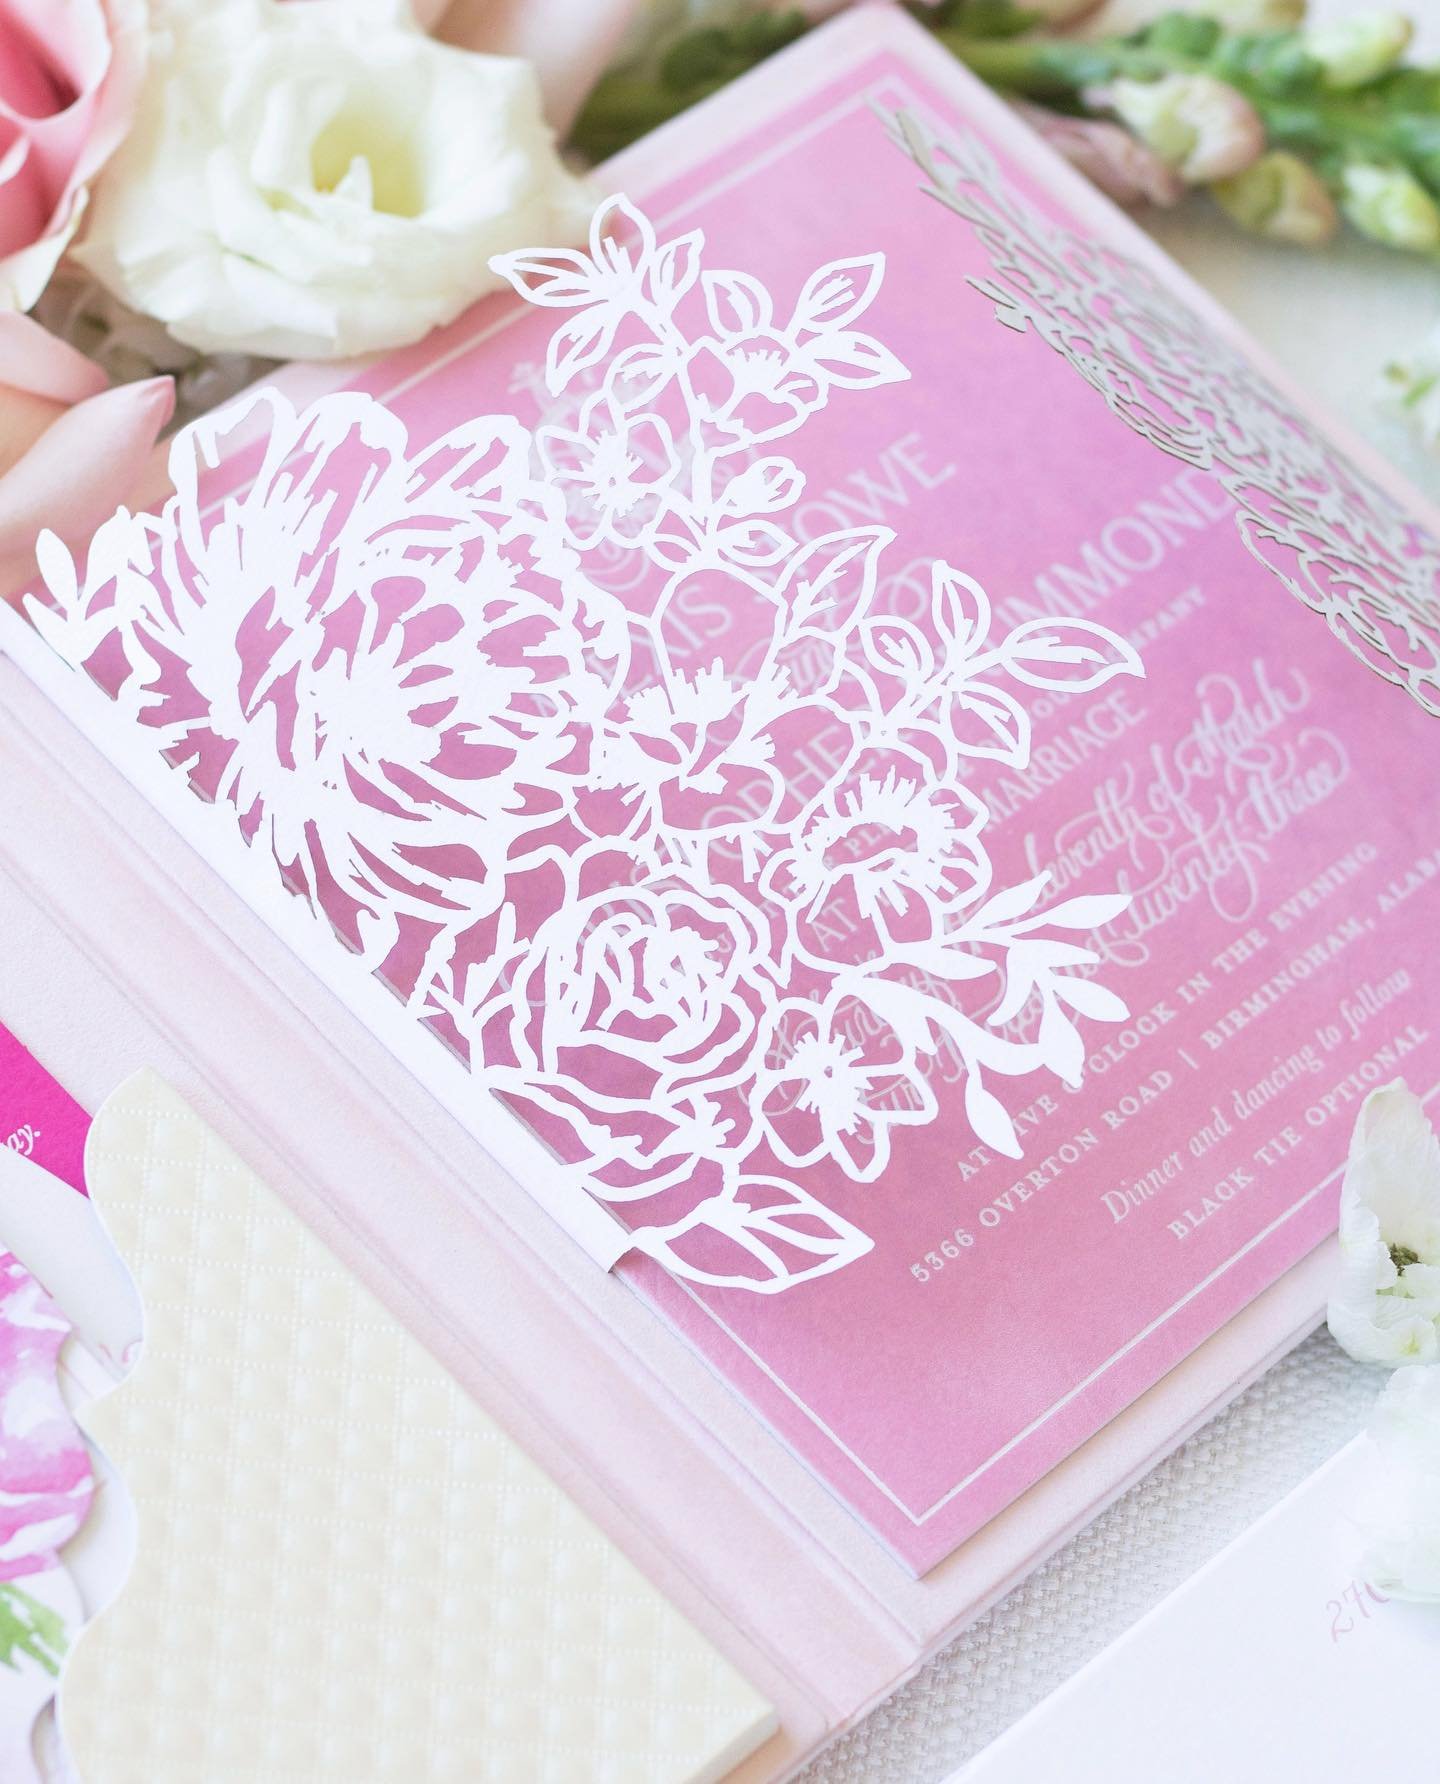 The intricate laser cut florals made this invitation suite unforgettable for their guests! Swipe to see more details 💗

#karaanne_paper #luxurywedding #luxuryweddinginvitations #lasercut #customweddinginvitations #unforgettable #birminghamwedding #a